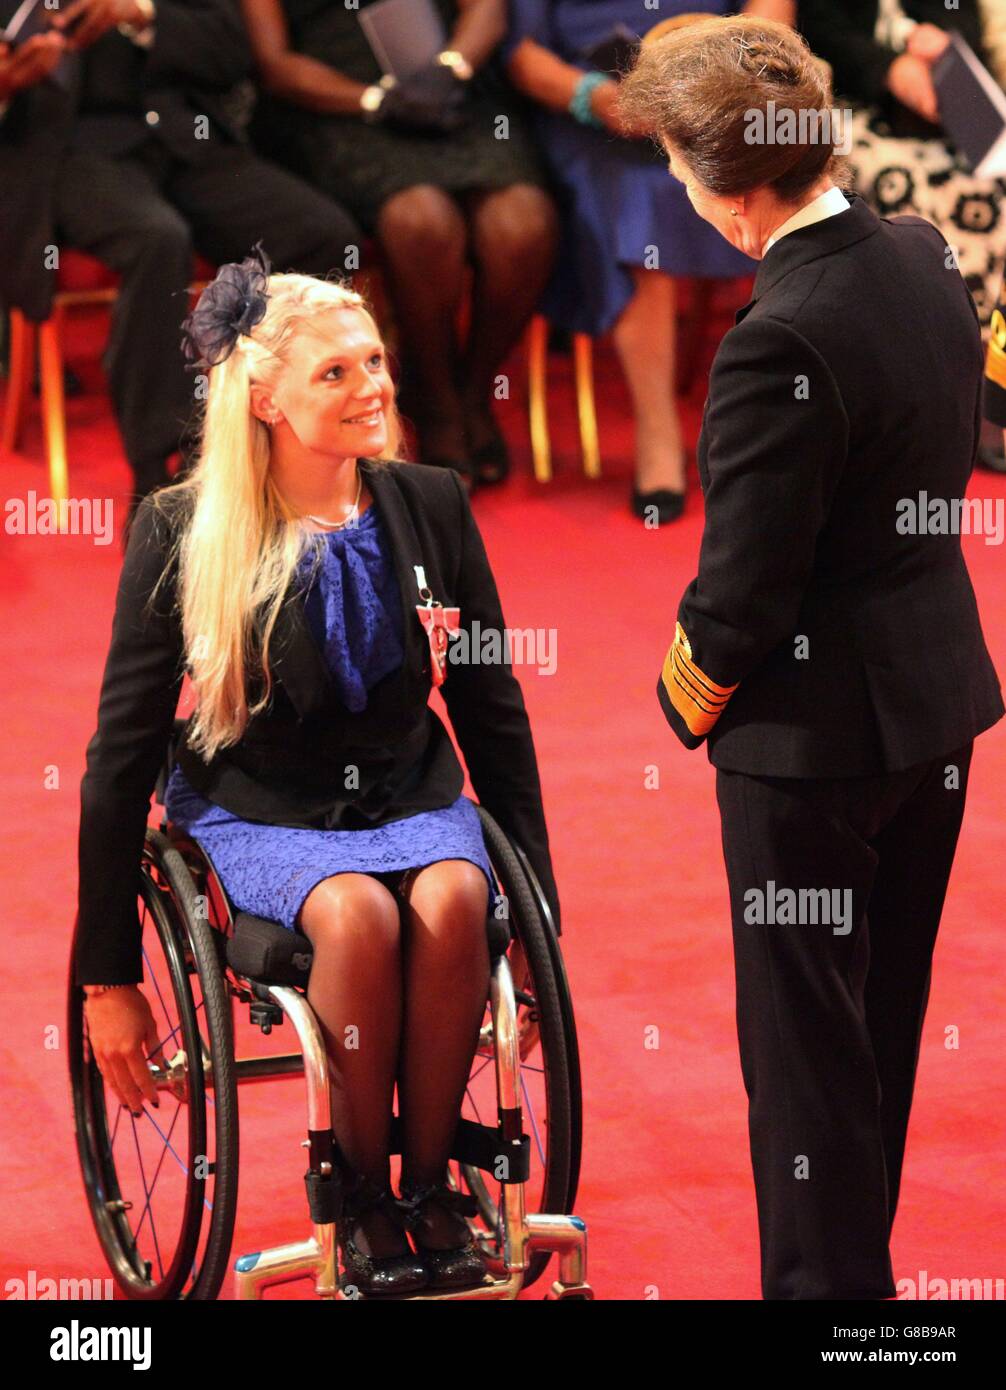 Wheelchair sportswoman Miss Jordanne Whiley from London is made an MBE (Member of the Order of the British Empire) by the Princess Royal at Buckingham Palace. Stock Photo